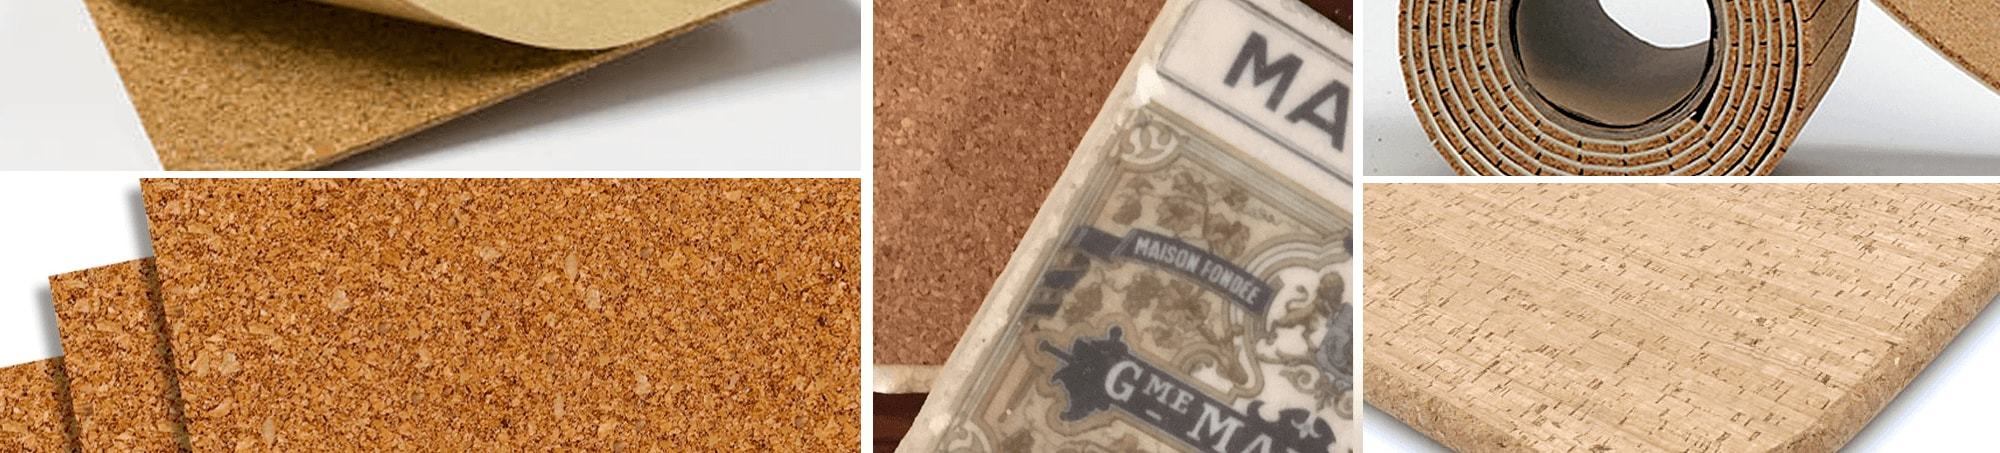 Cork Consumer Products